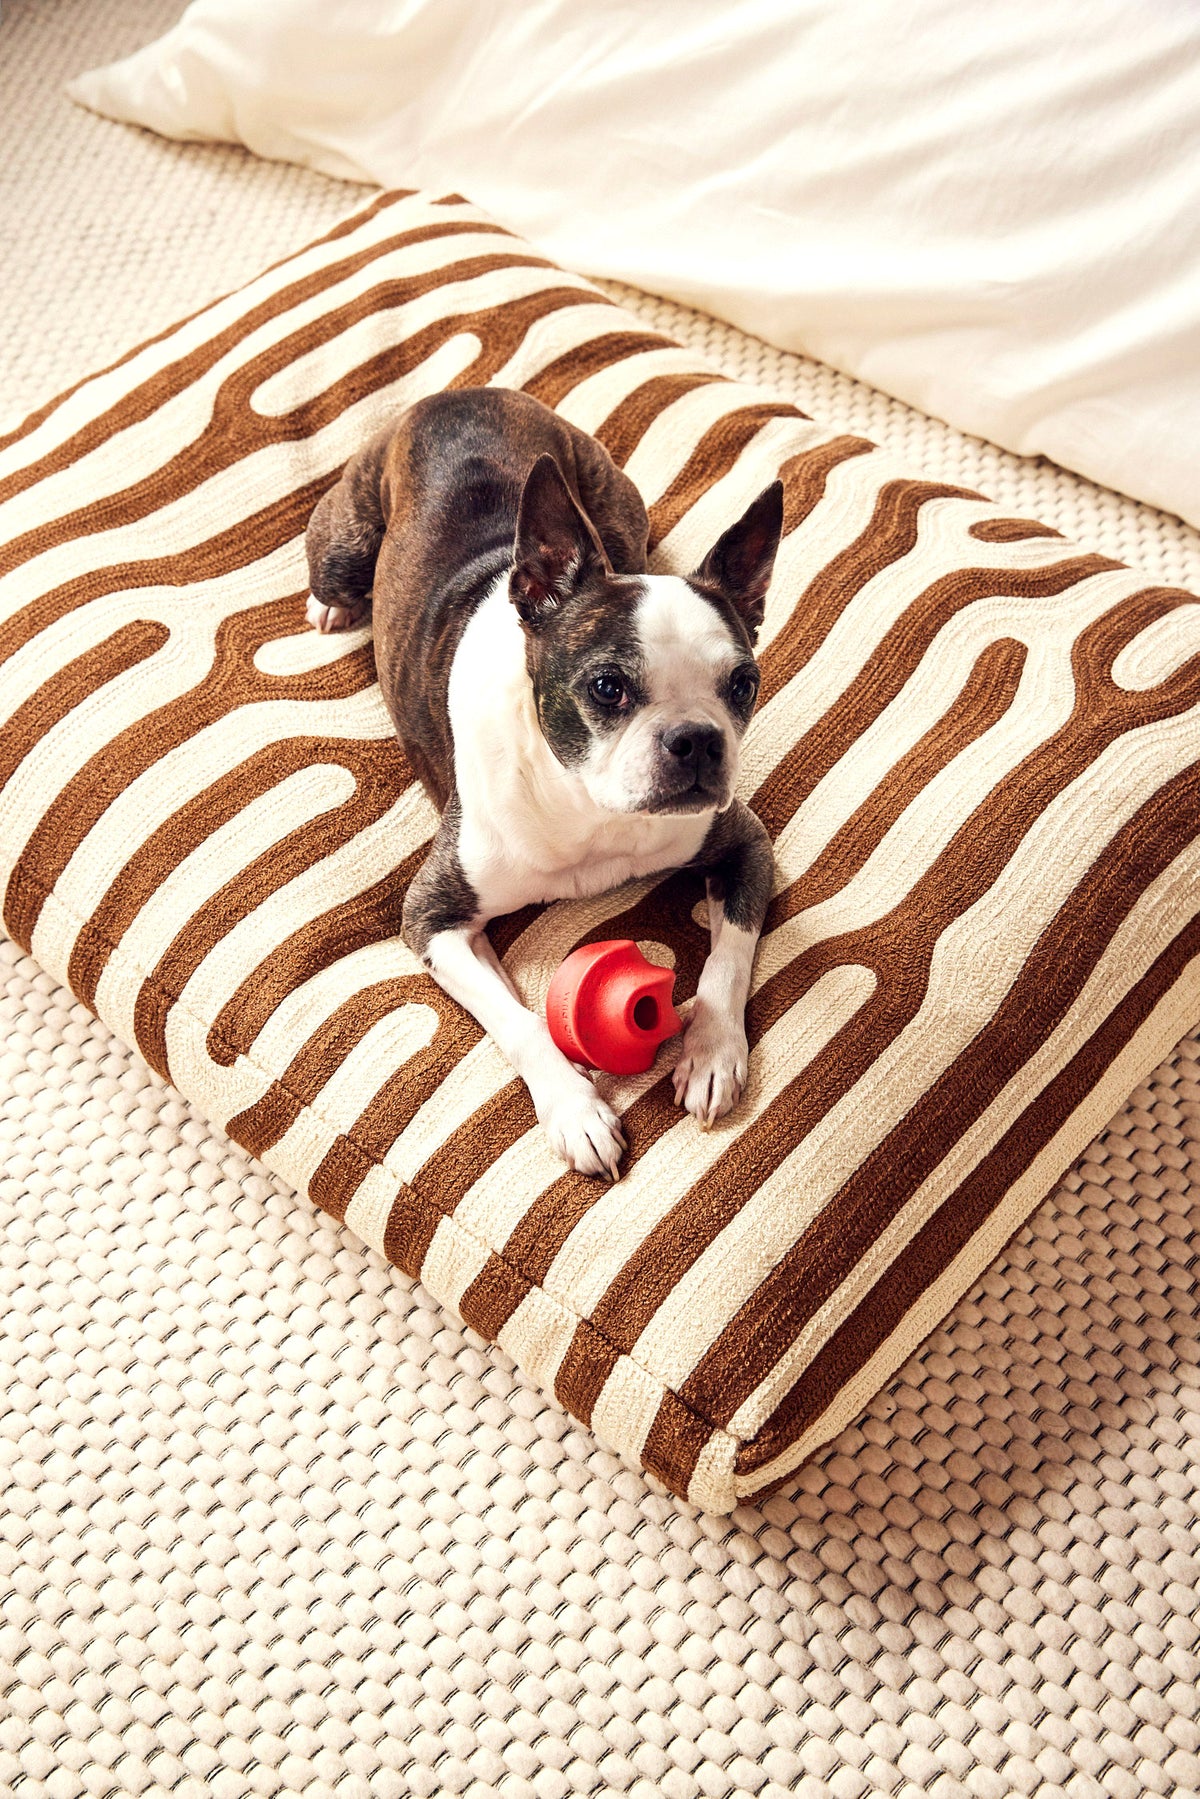 Dusen Dusen Oak Dog Bed. Embroidered dog bed in brown and cream Oak pattern. 100% cotton canvas base with acrylic chain embroidery, poly insert, and back zipper. 36"x 27"x 4".